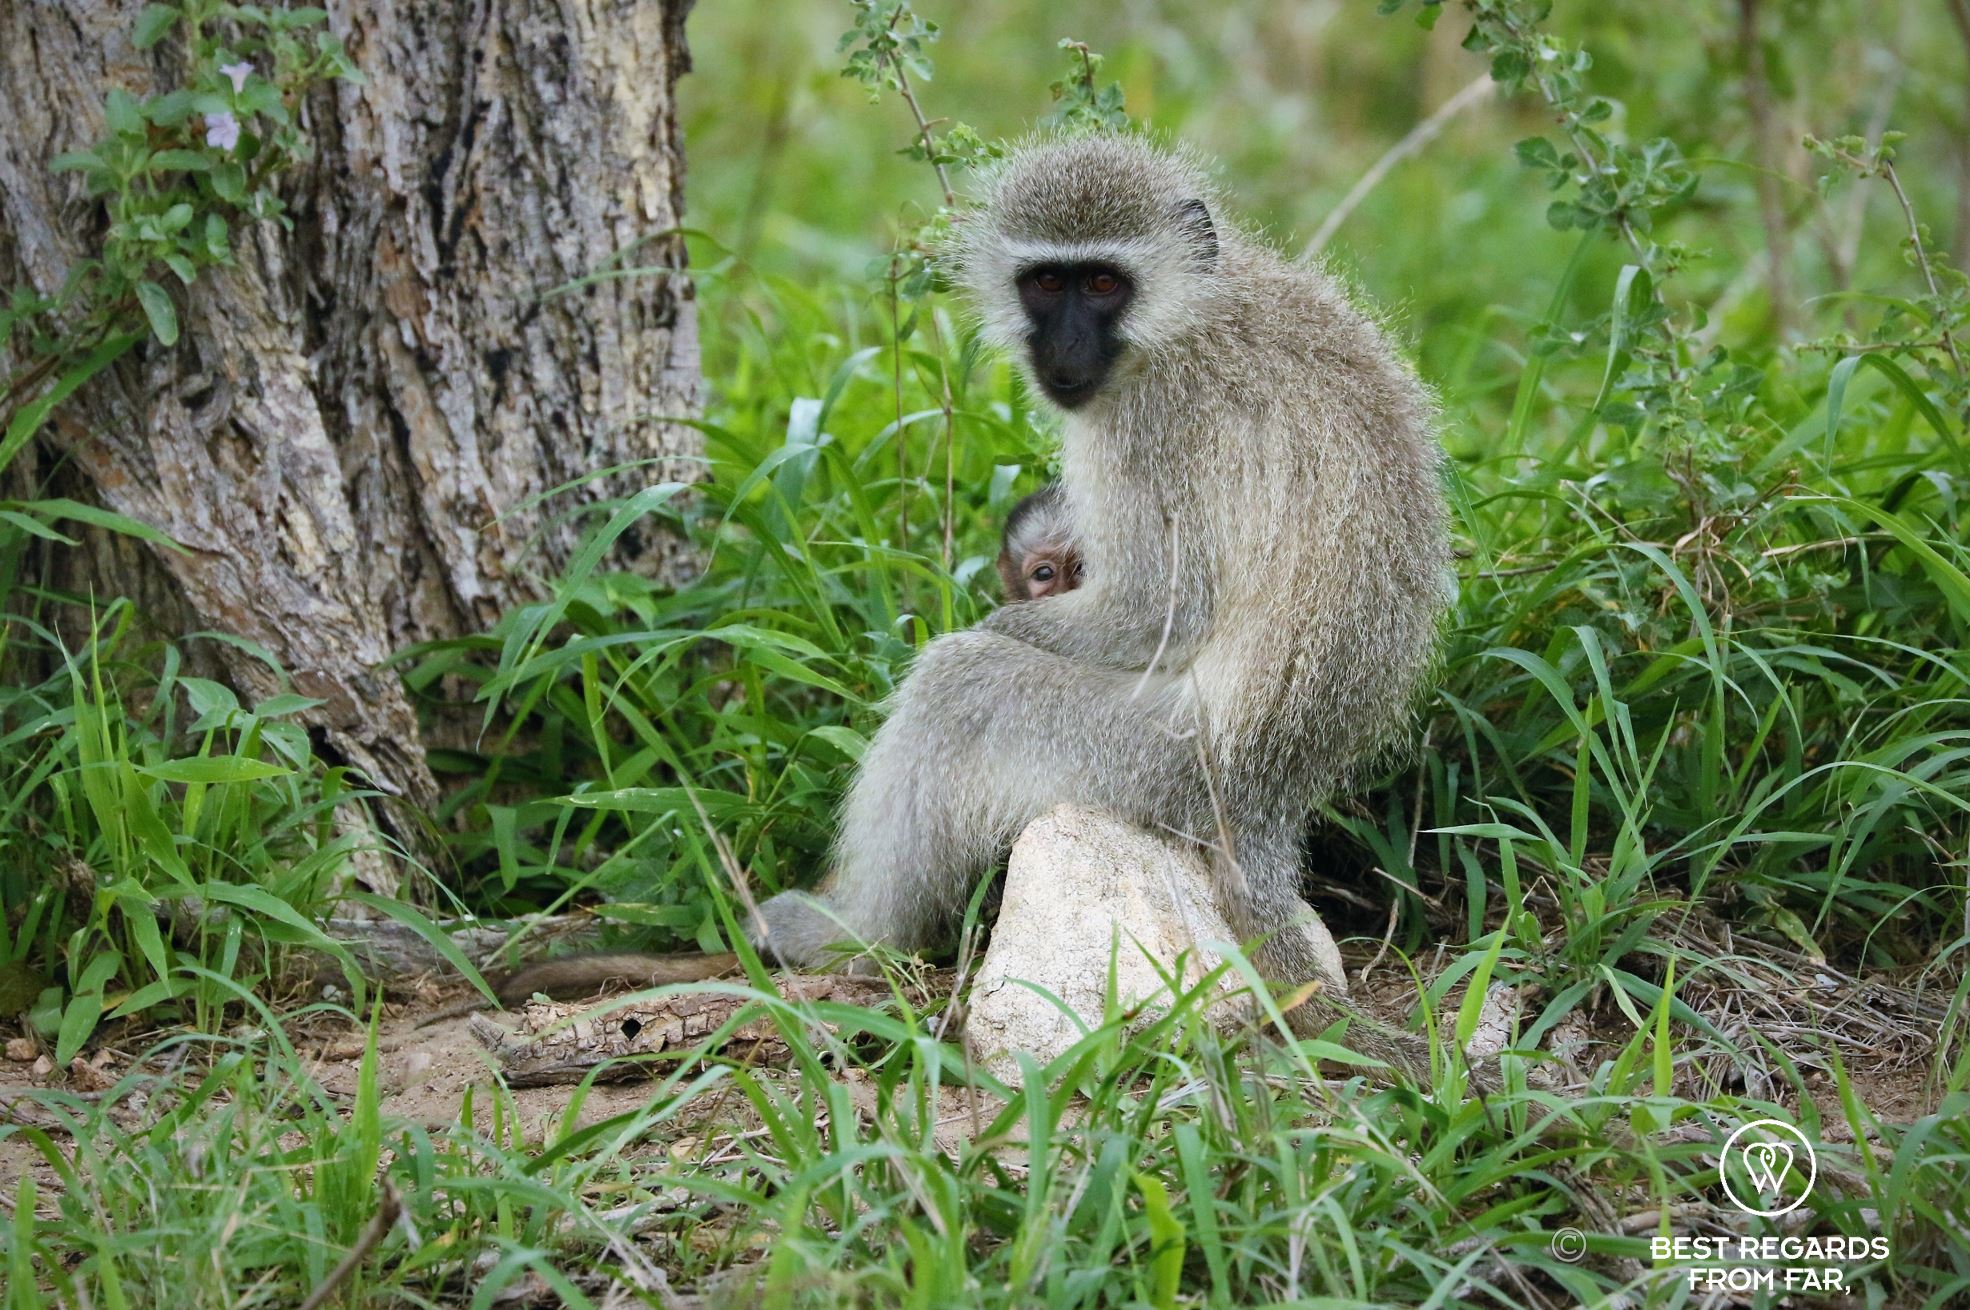 Mother vervet monkey with grey fur and black face holding her baby at the foot of a tree, Kruger NP, South Africa.